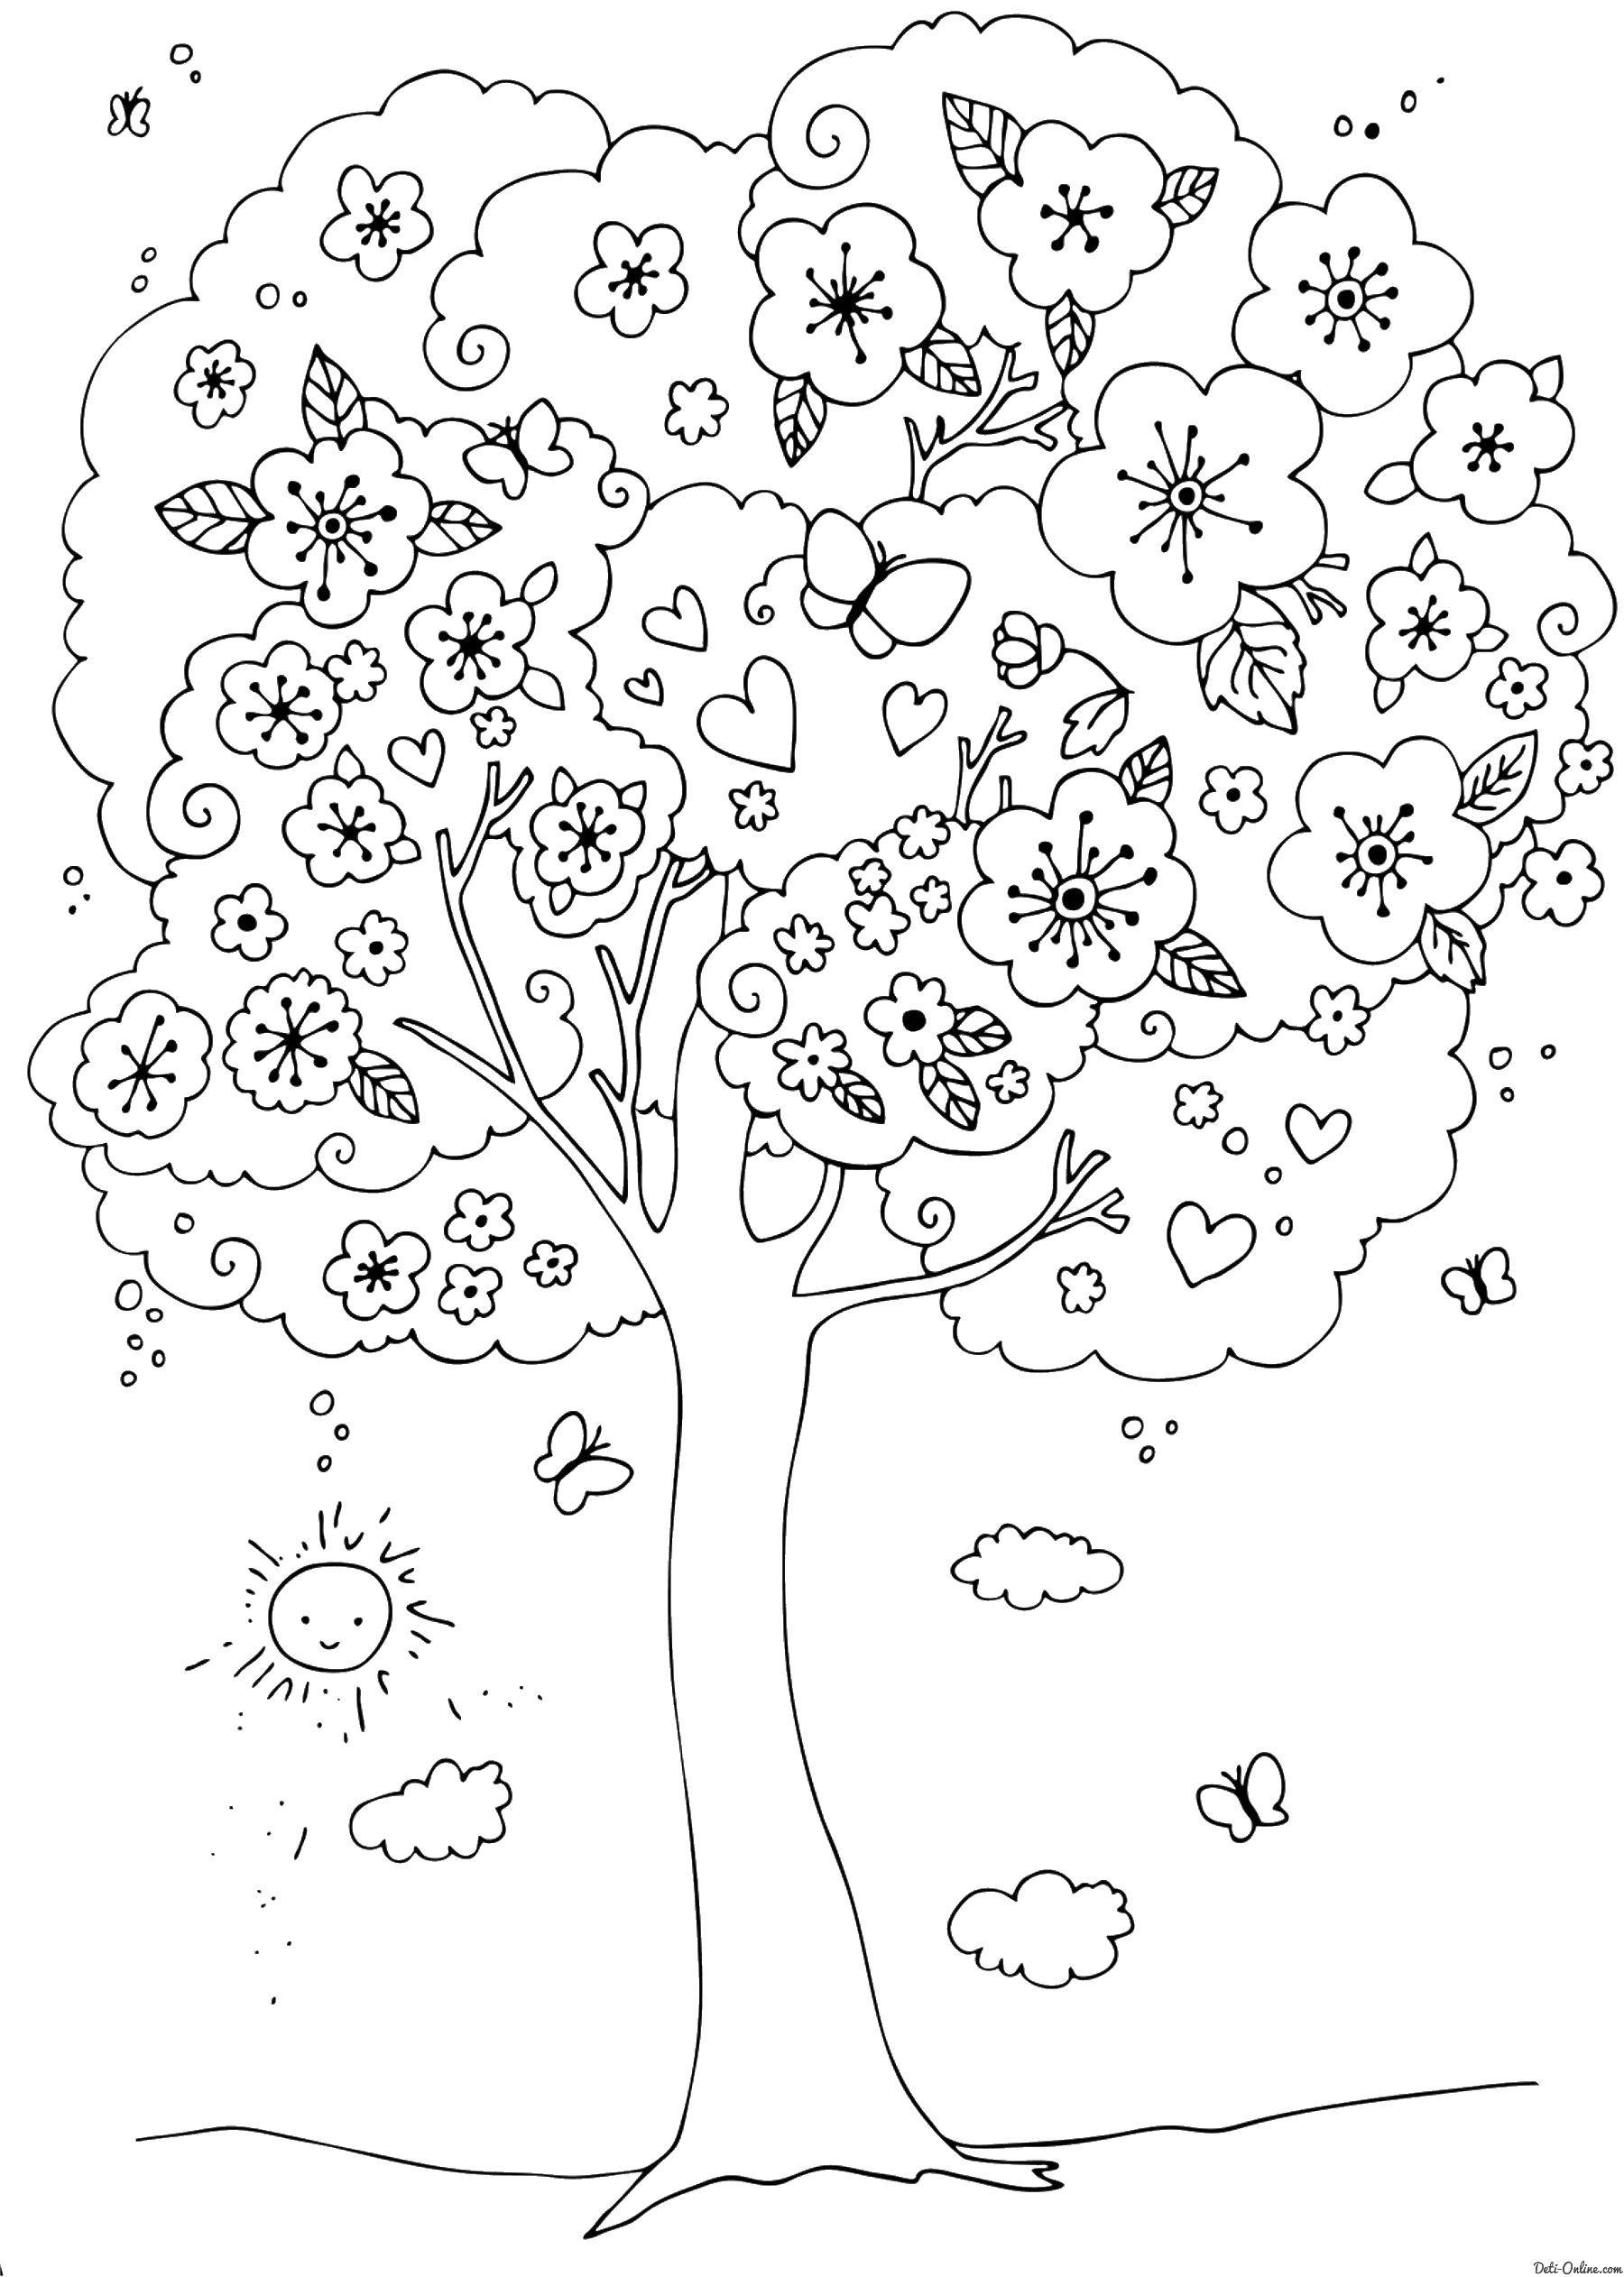 Coloring Flowering tree. Category Nature. Tags:  tree, butterflies.